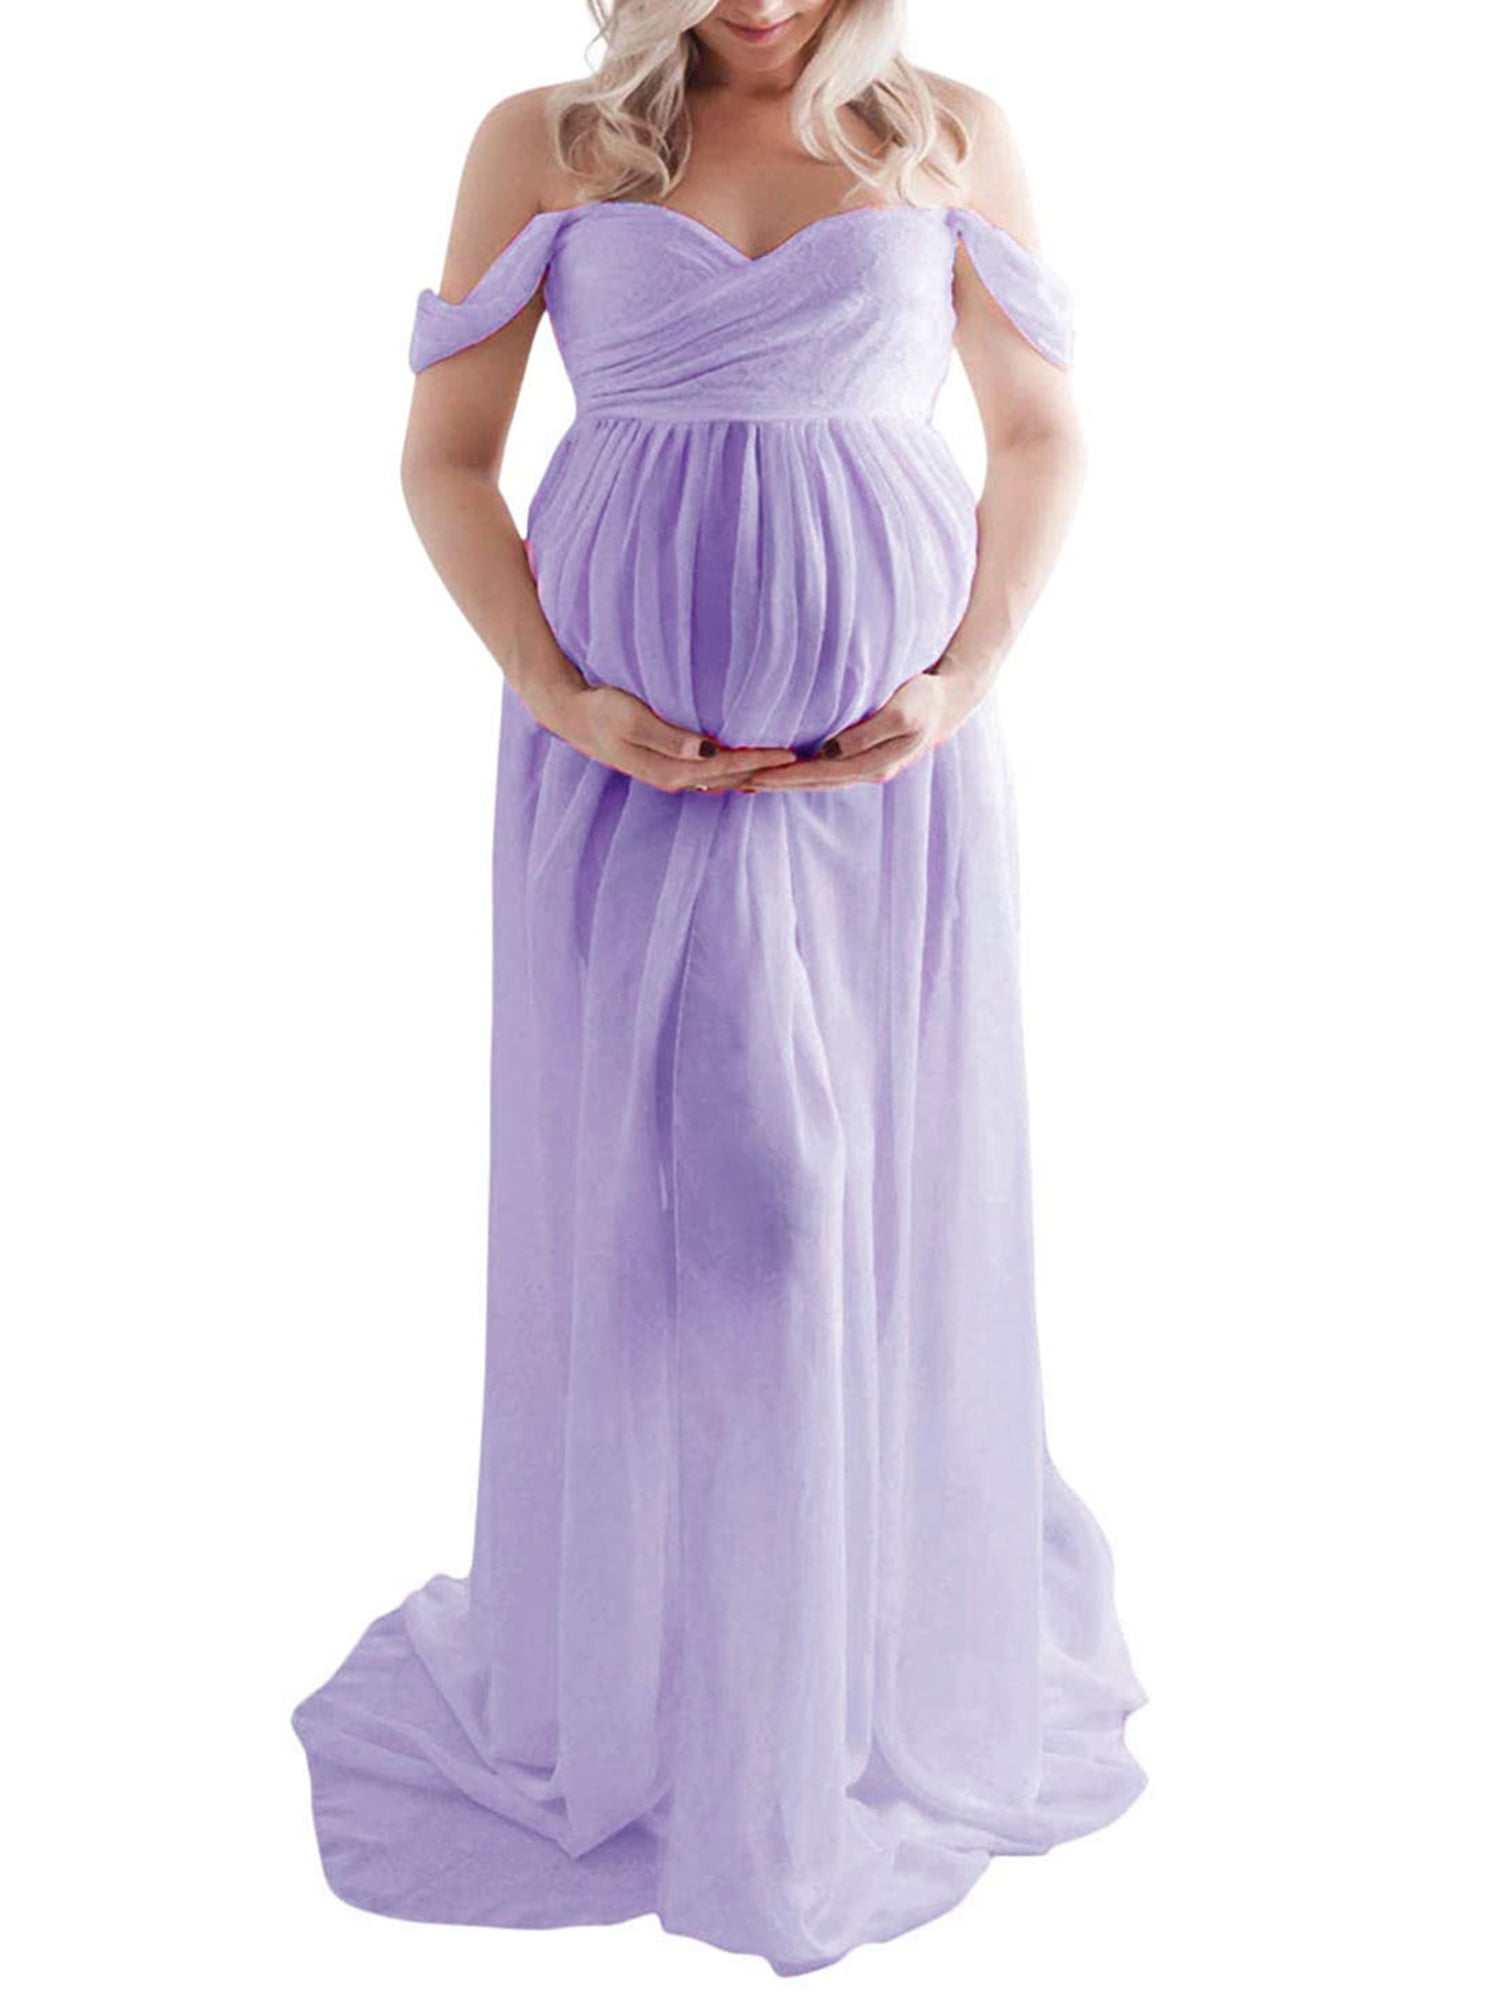 Raruxxin Maternity Dress for Photography Off-Shoulder Chiffon Gown ...